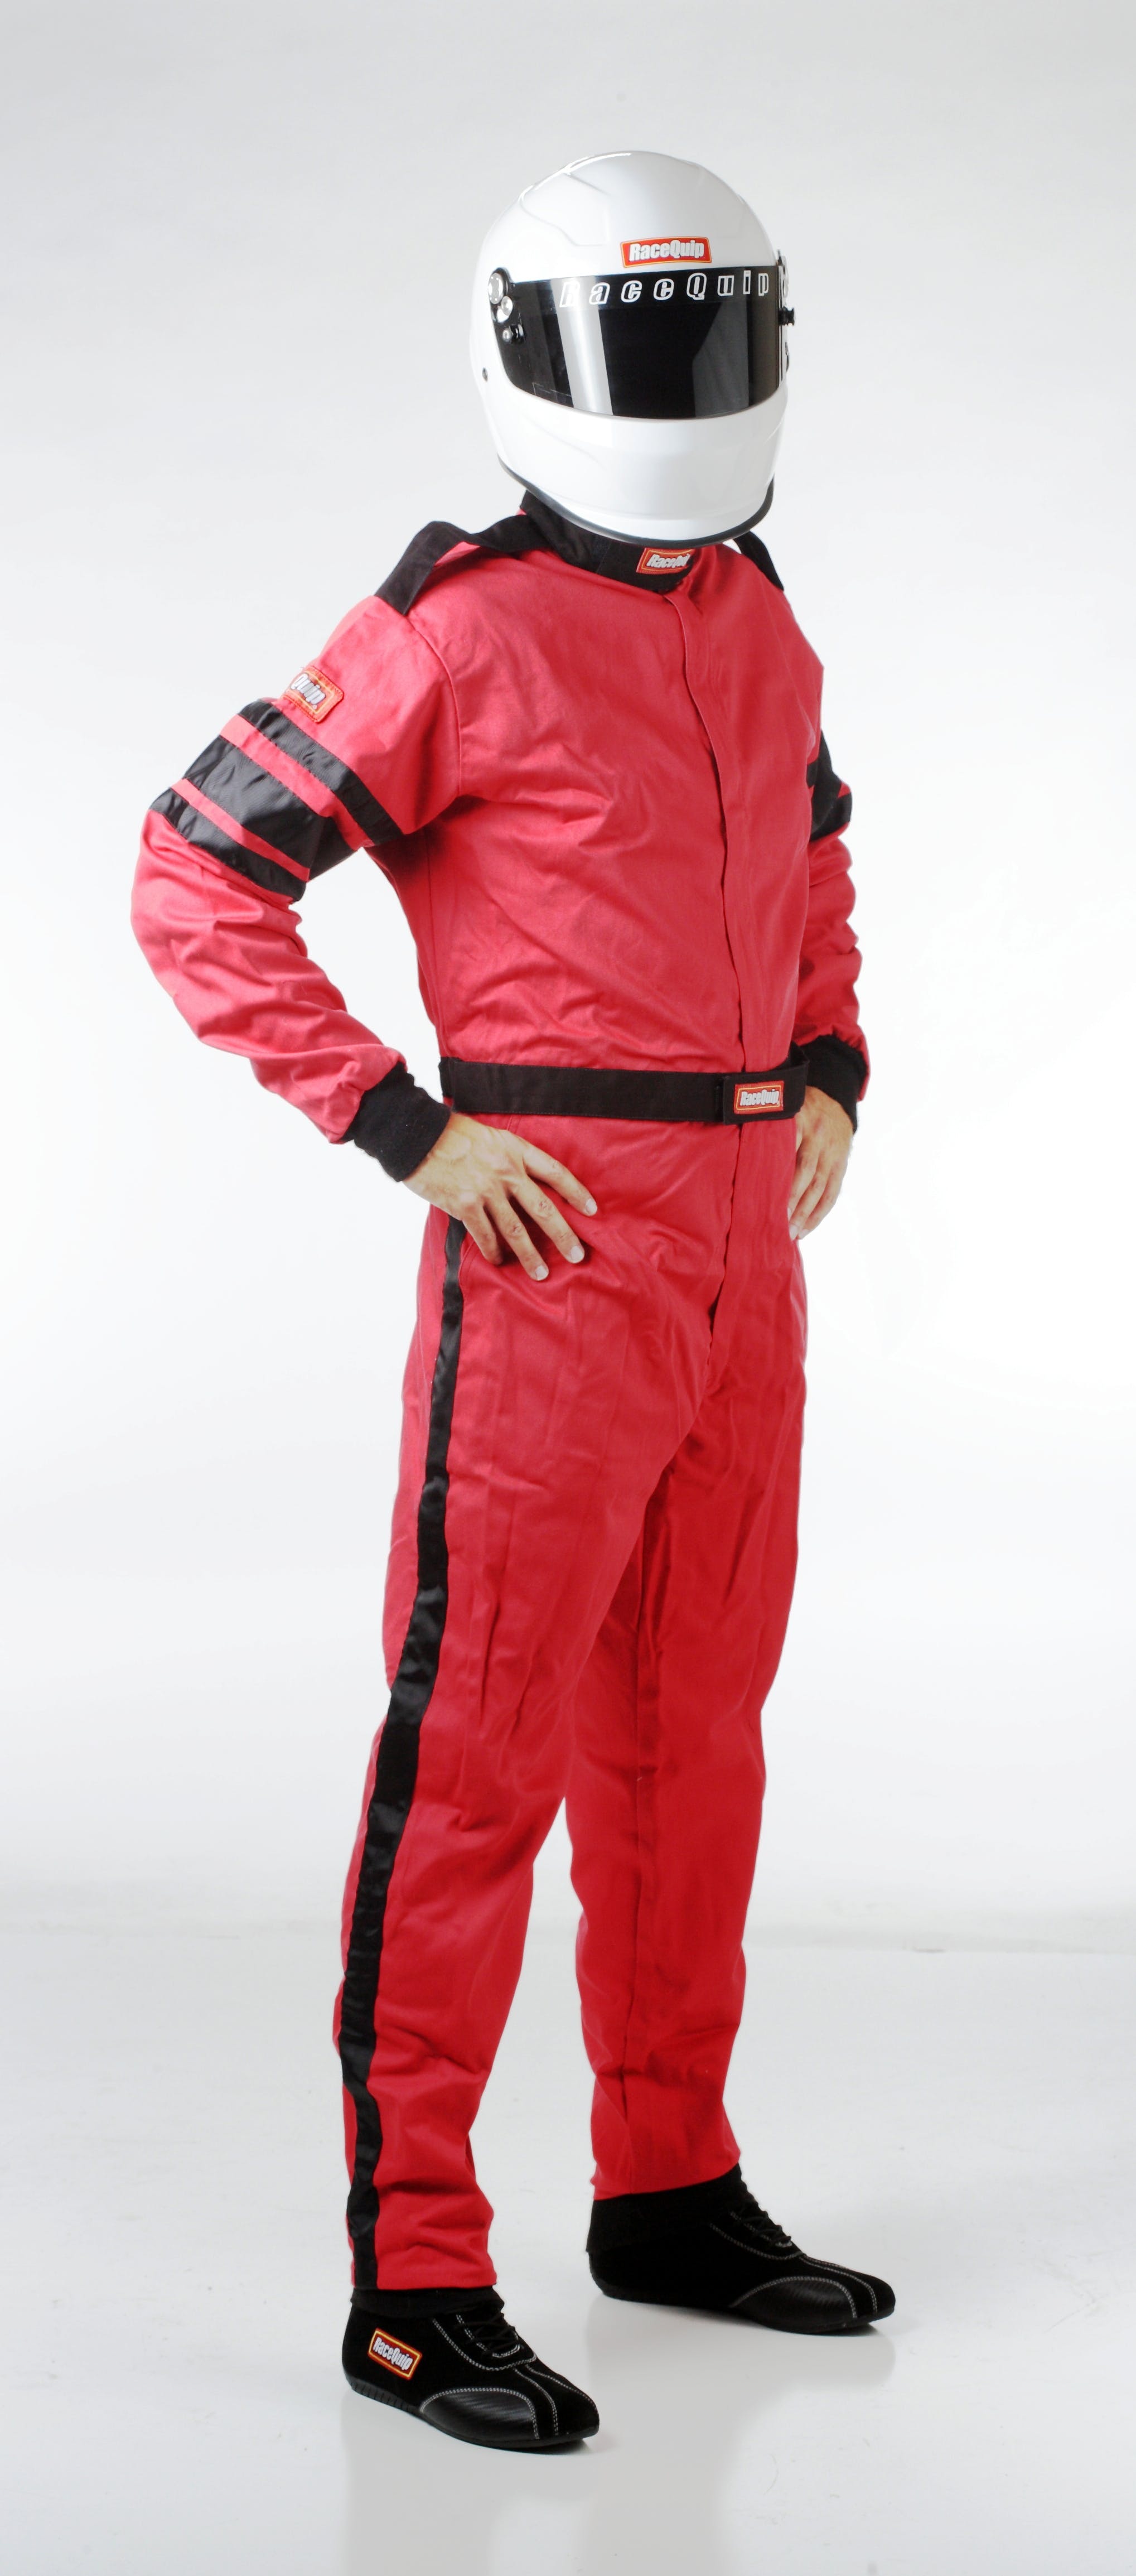 RaceQuip 110017 SFI-1 Pyrovatex One-Piece Single-Layer Racing Fire Suit (Red, XX-Large)